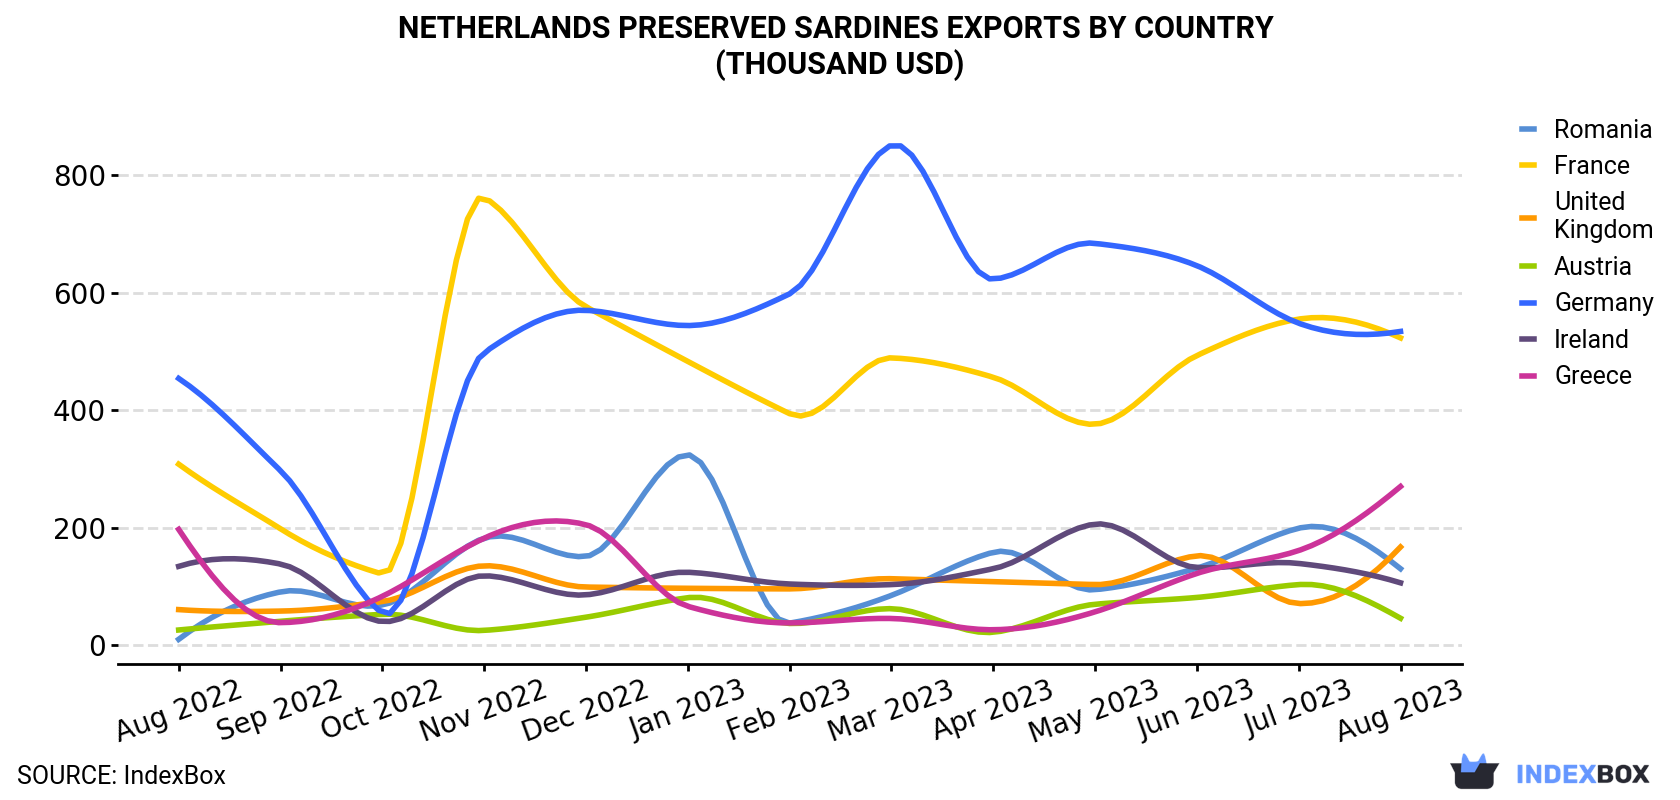 Netherlands Preserved Sardines Exports By Country (Thousand USD)